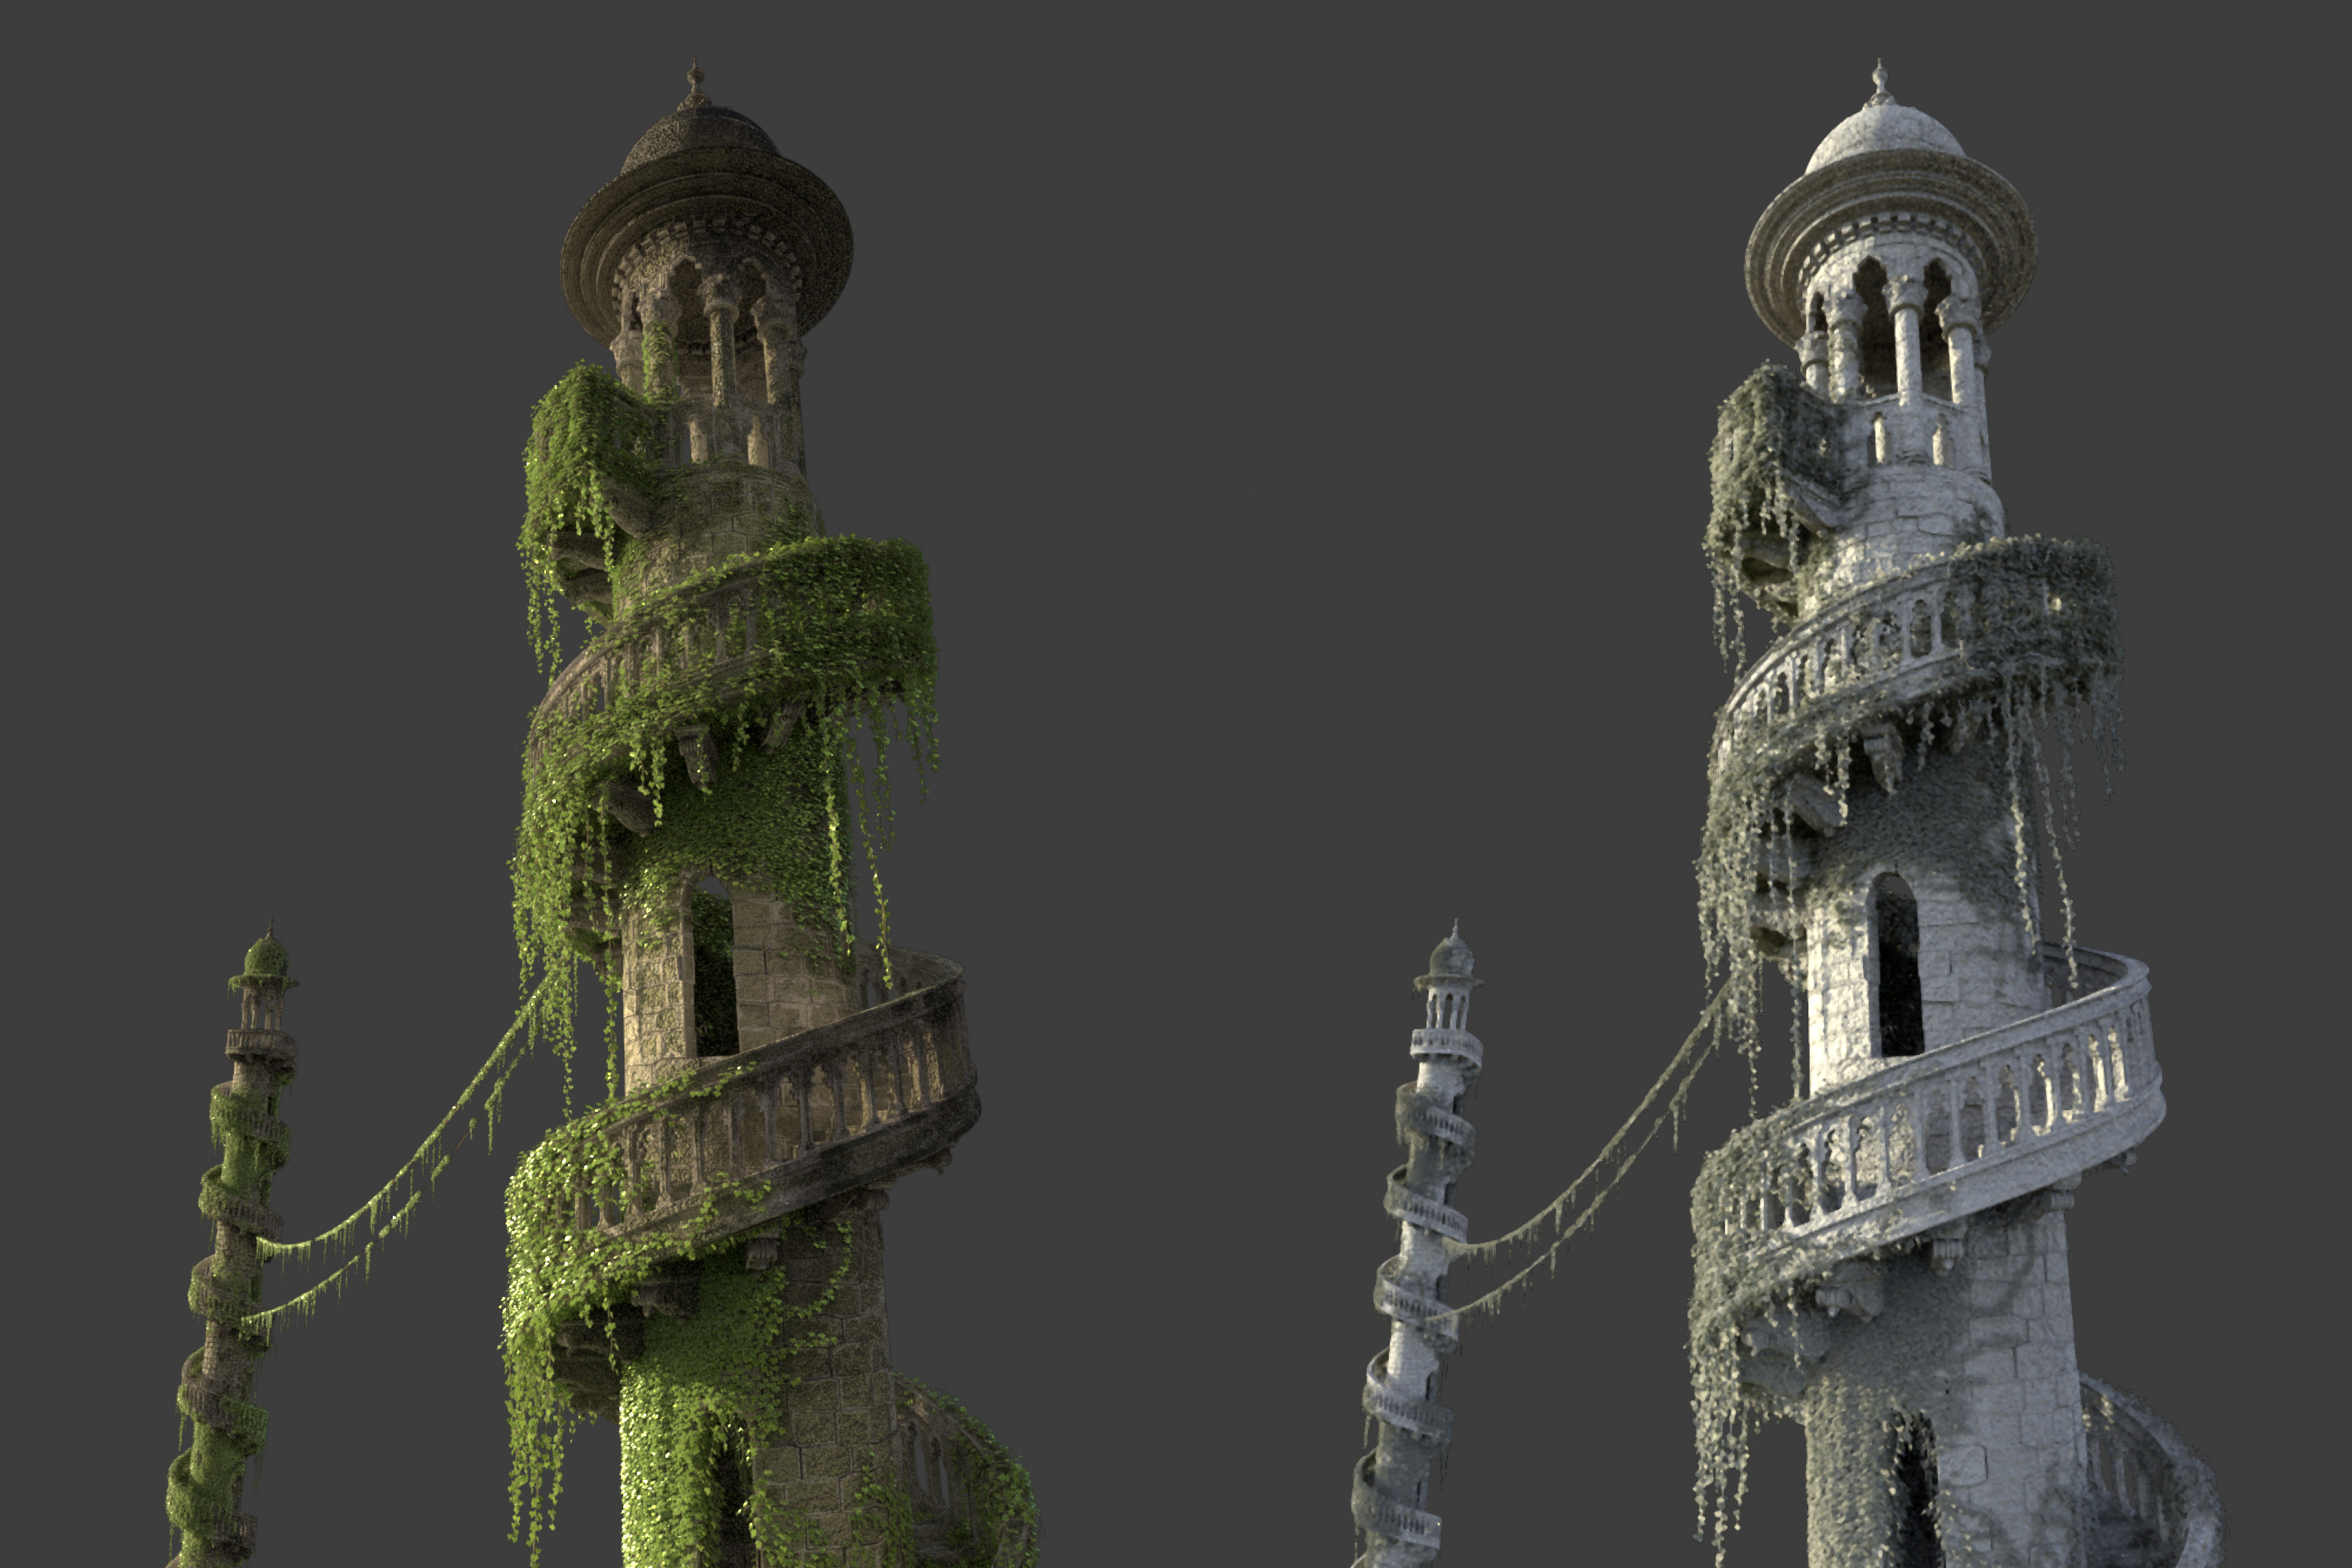 Tower lookdev with extra ivy growth